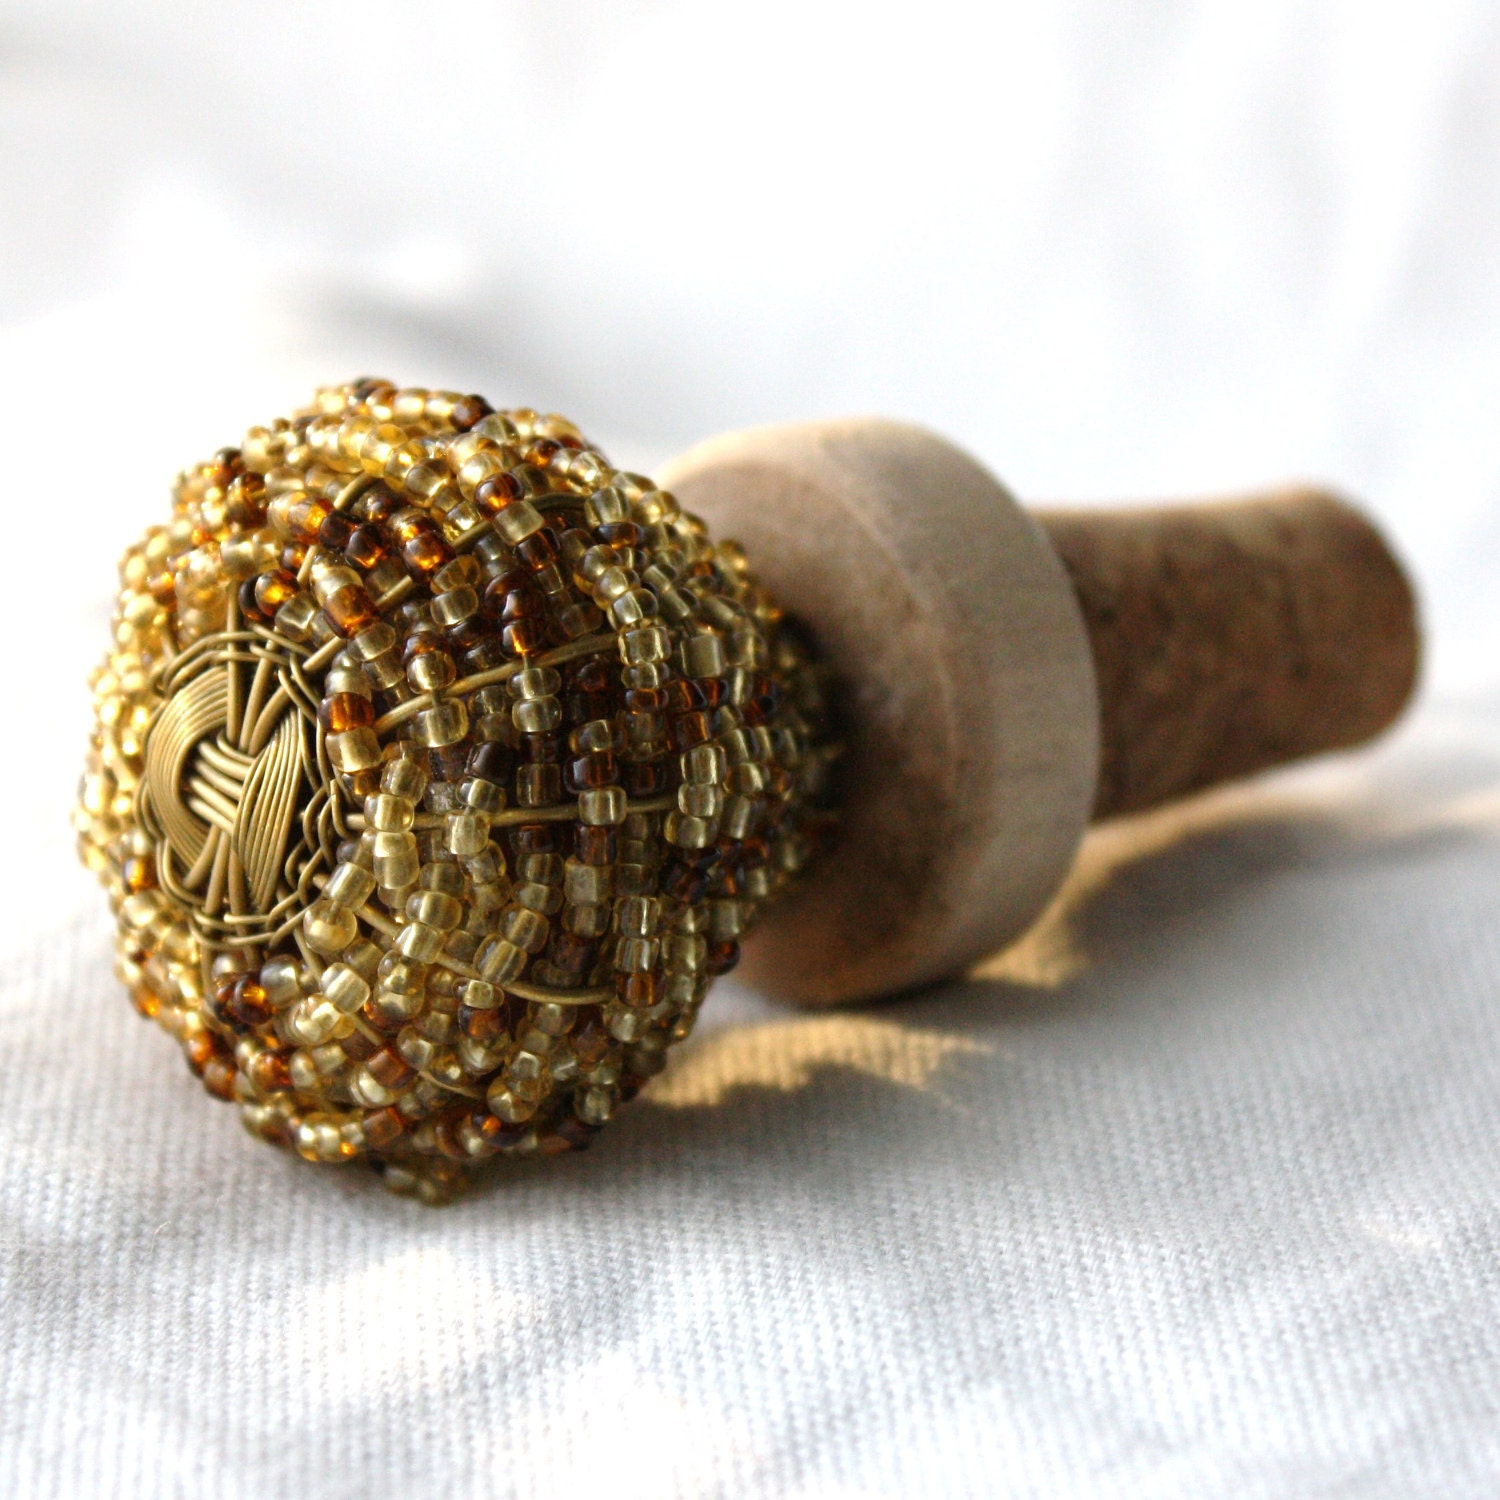 Wine Stopper- Brown and gold beaded glass doorknob / drawer pull and new cork